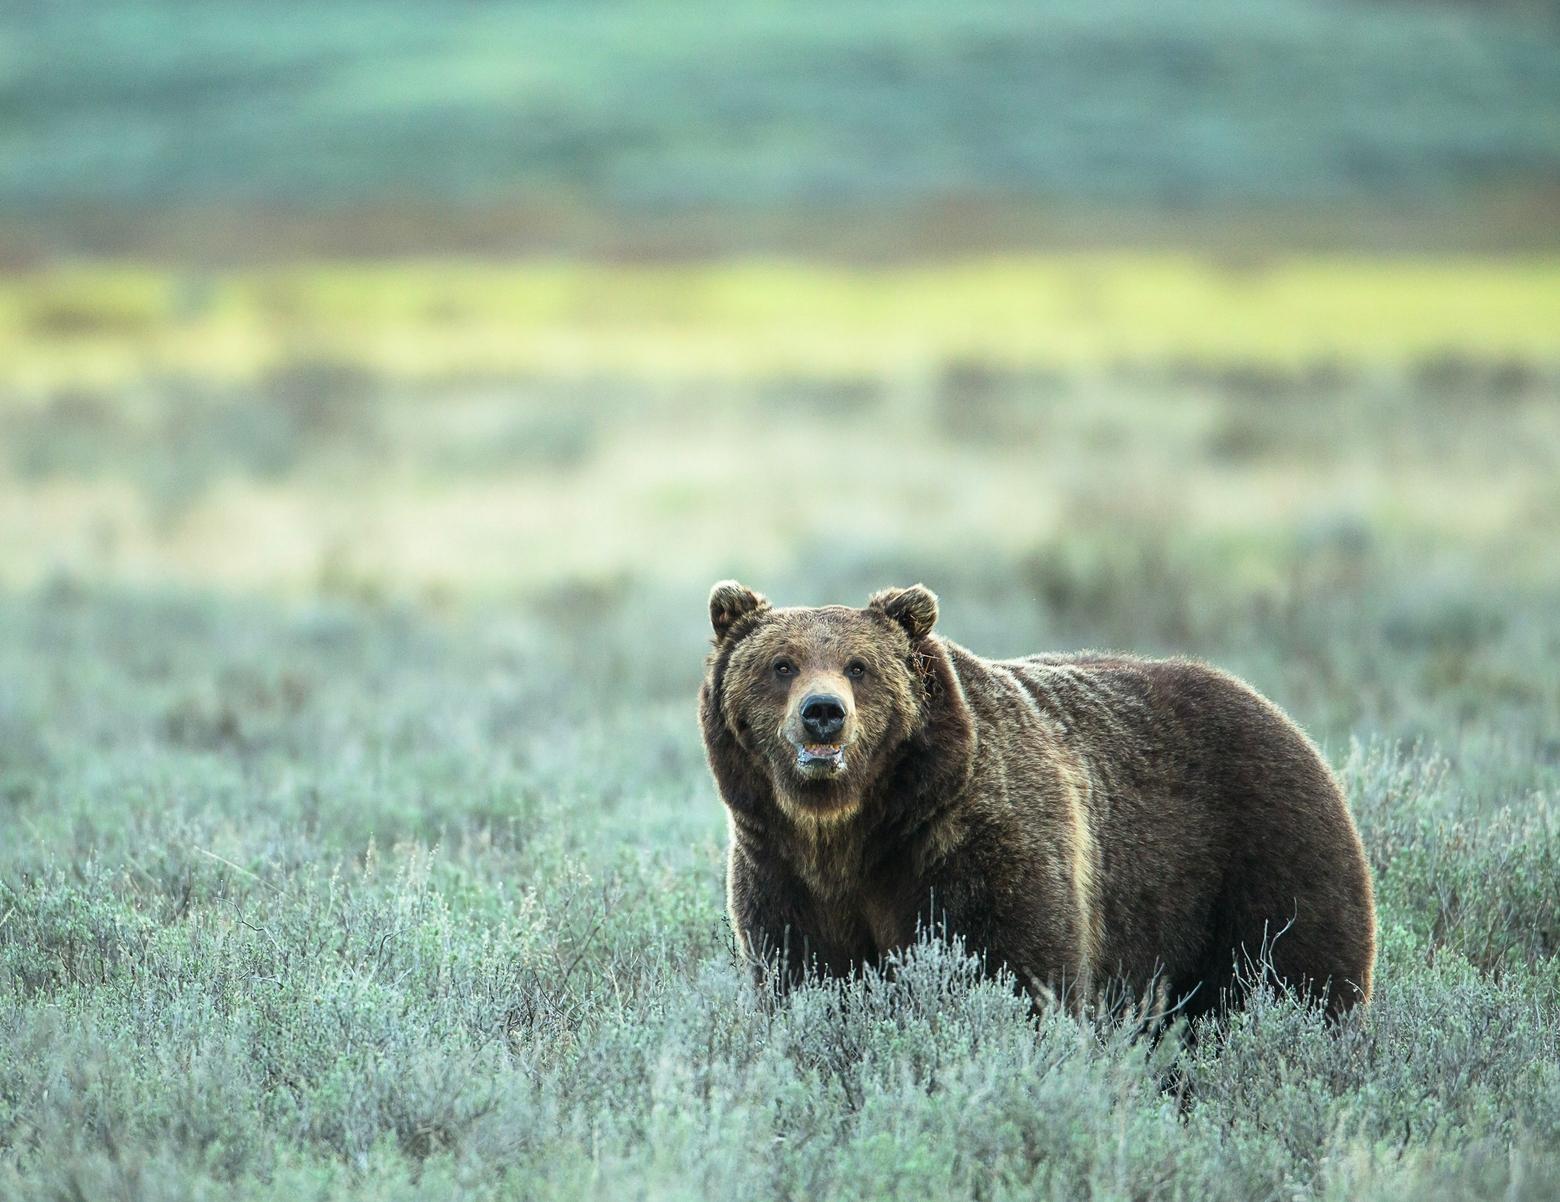 Brad Orsted has amassed a remarkable body of wildlife imagery and video footage but he says the most formidable predator stalking him day and night for years, in the town, wilderness and dreams, was grief.  Photo of Greater Yellowstone grizzly courtesy Brad Orsted